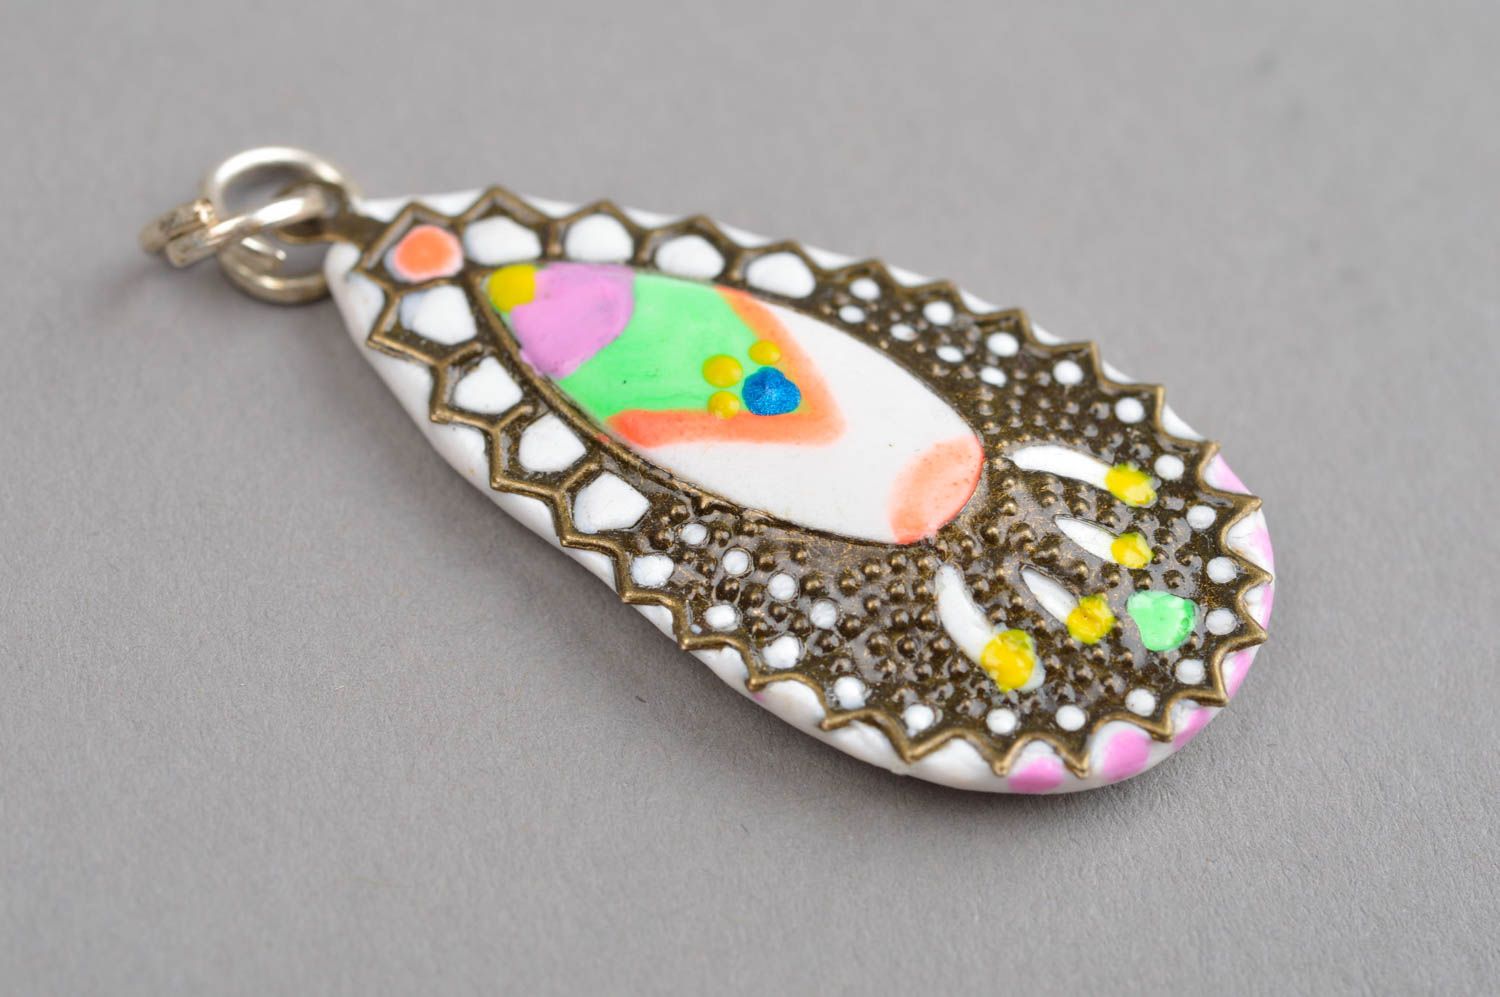 Bright handmade plastic pendant neck accessories for girls polymer clay ideas photo 2